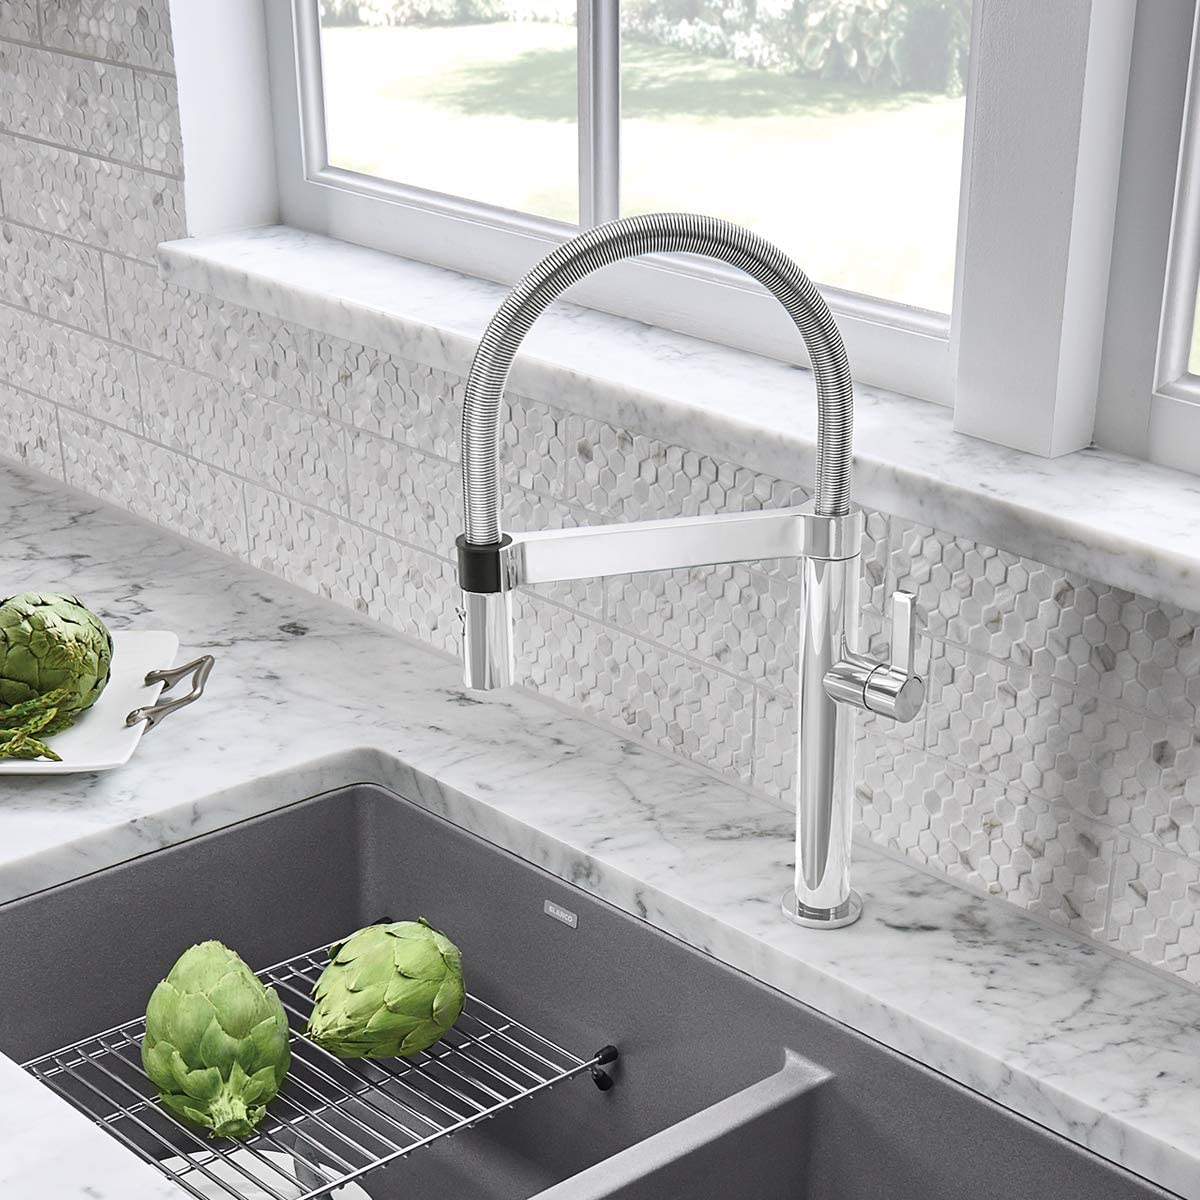 Culina Mini Semi-Pro Kitchen Faucet with Magnetic Handspray, 1.8 GPM- Chrome